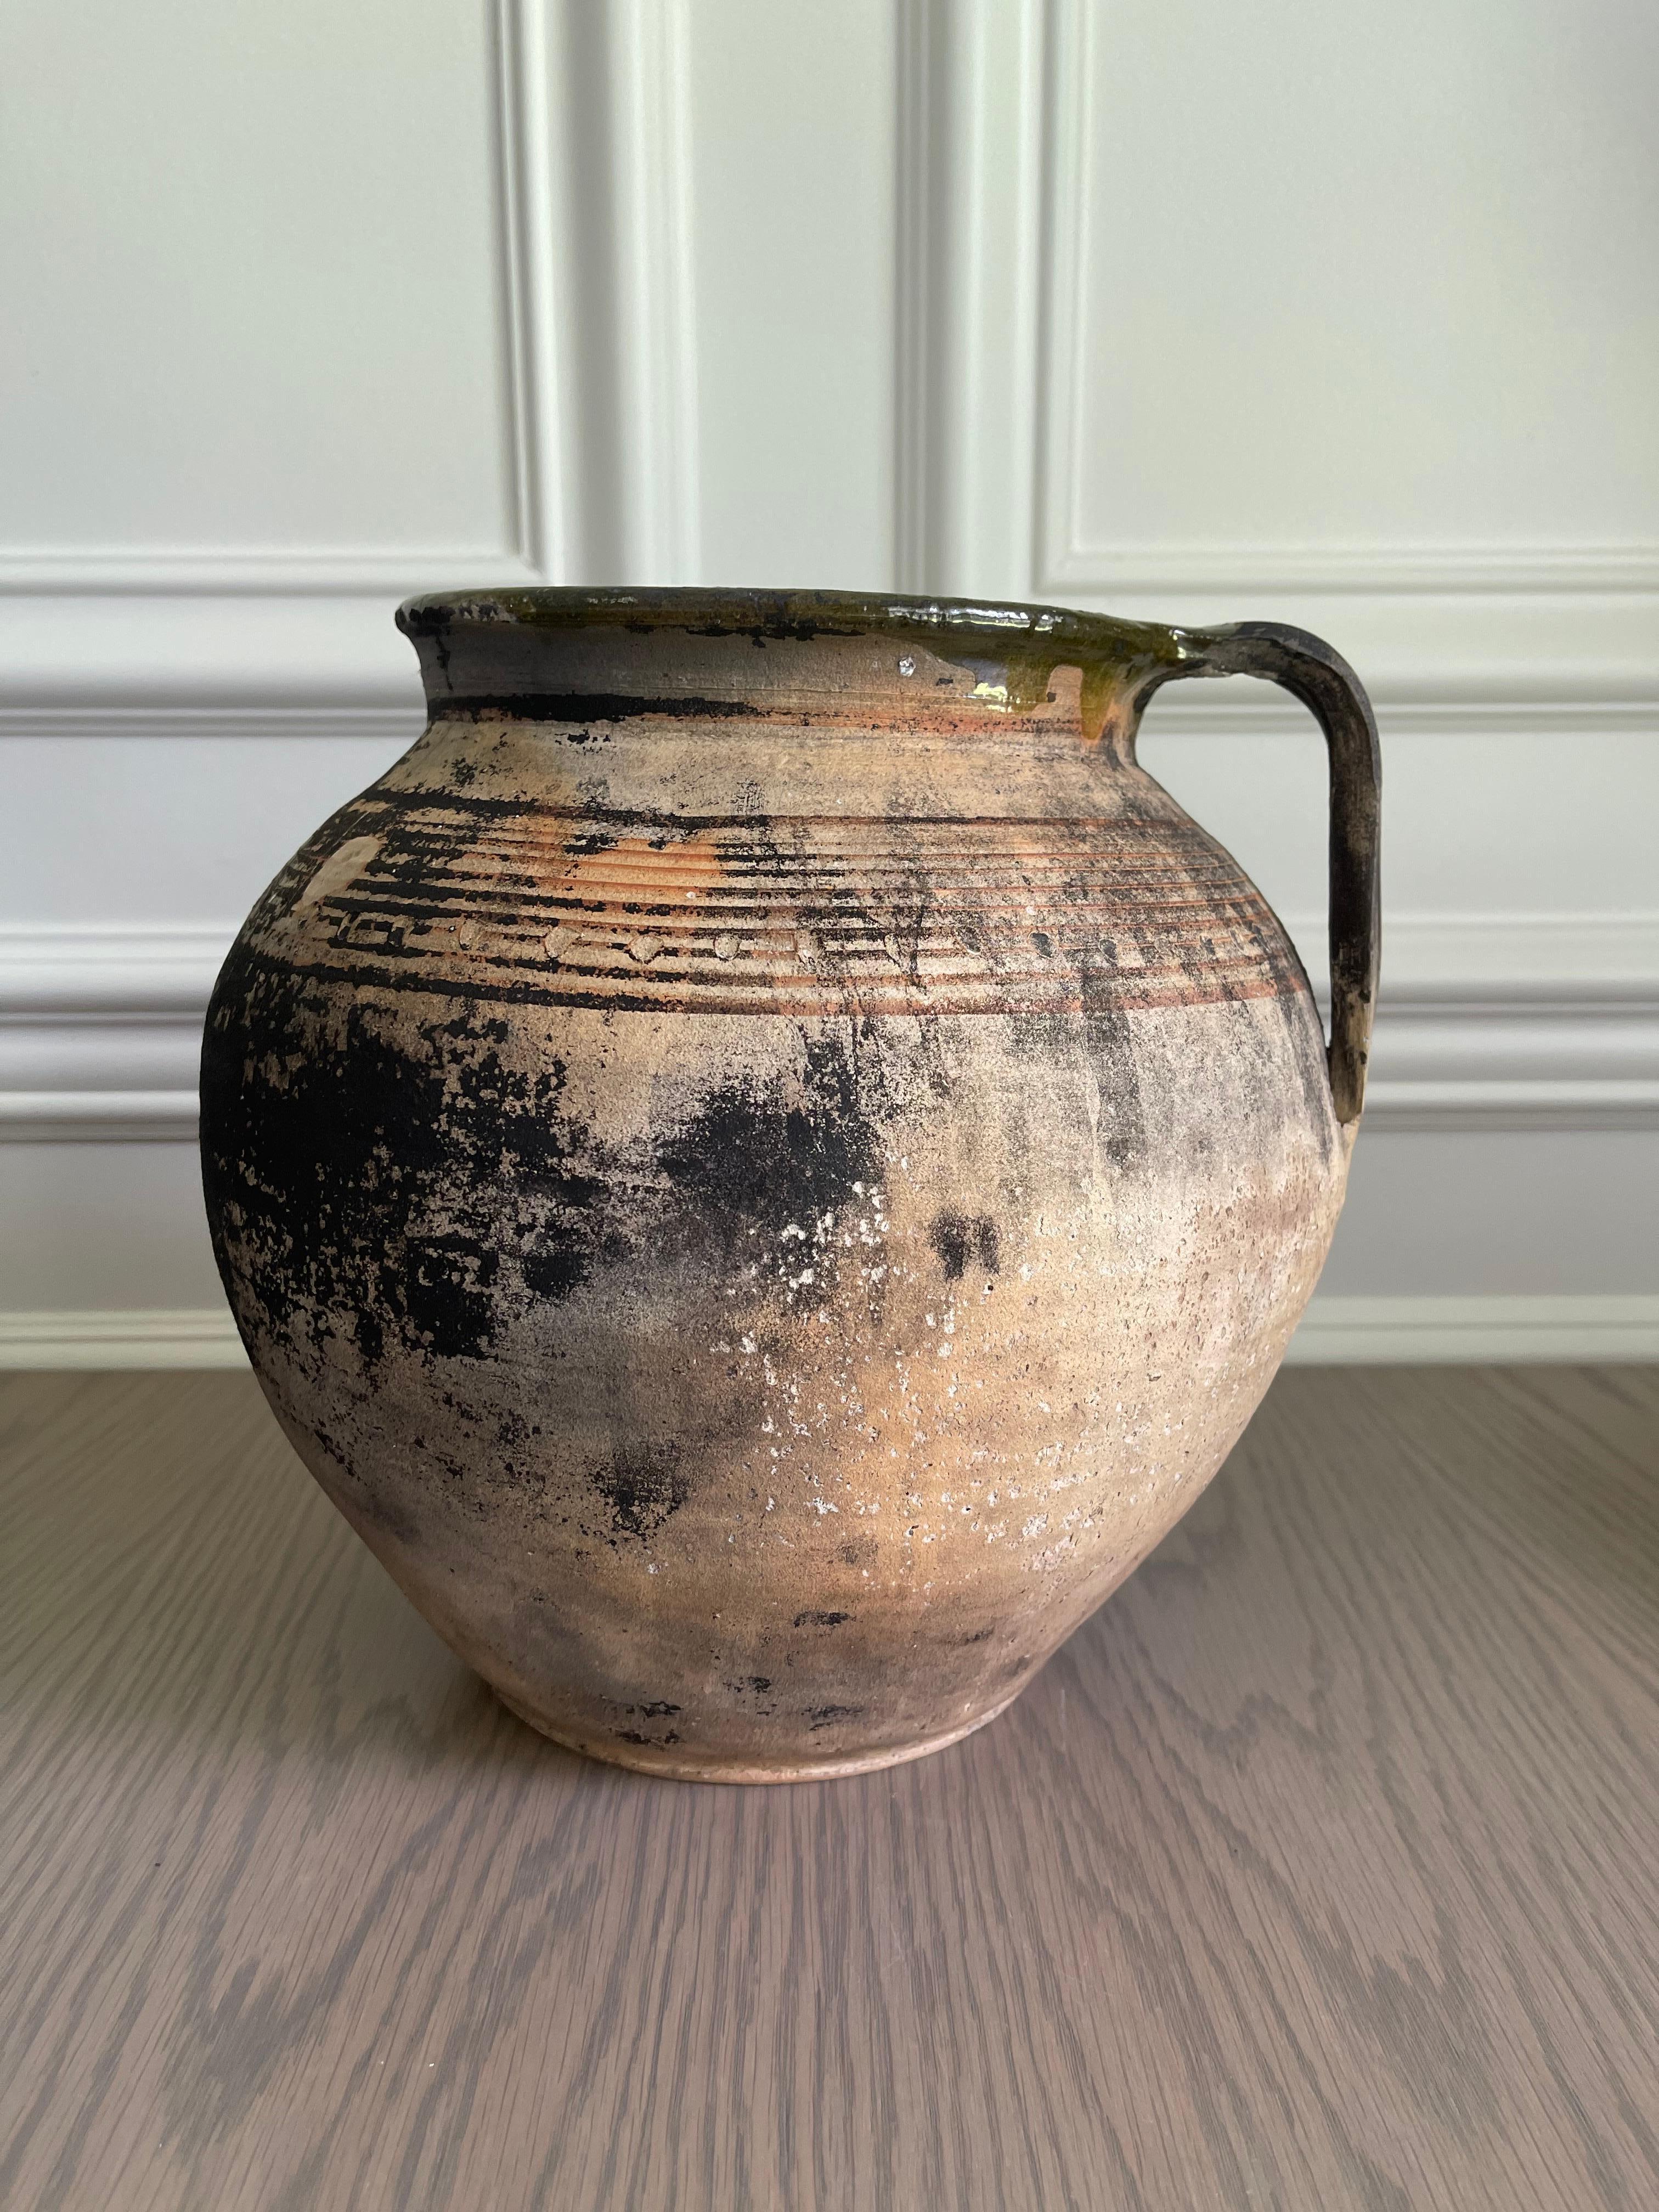 Antique clay pot. c. 1800's. Beautifully aged with unique markings.